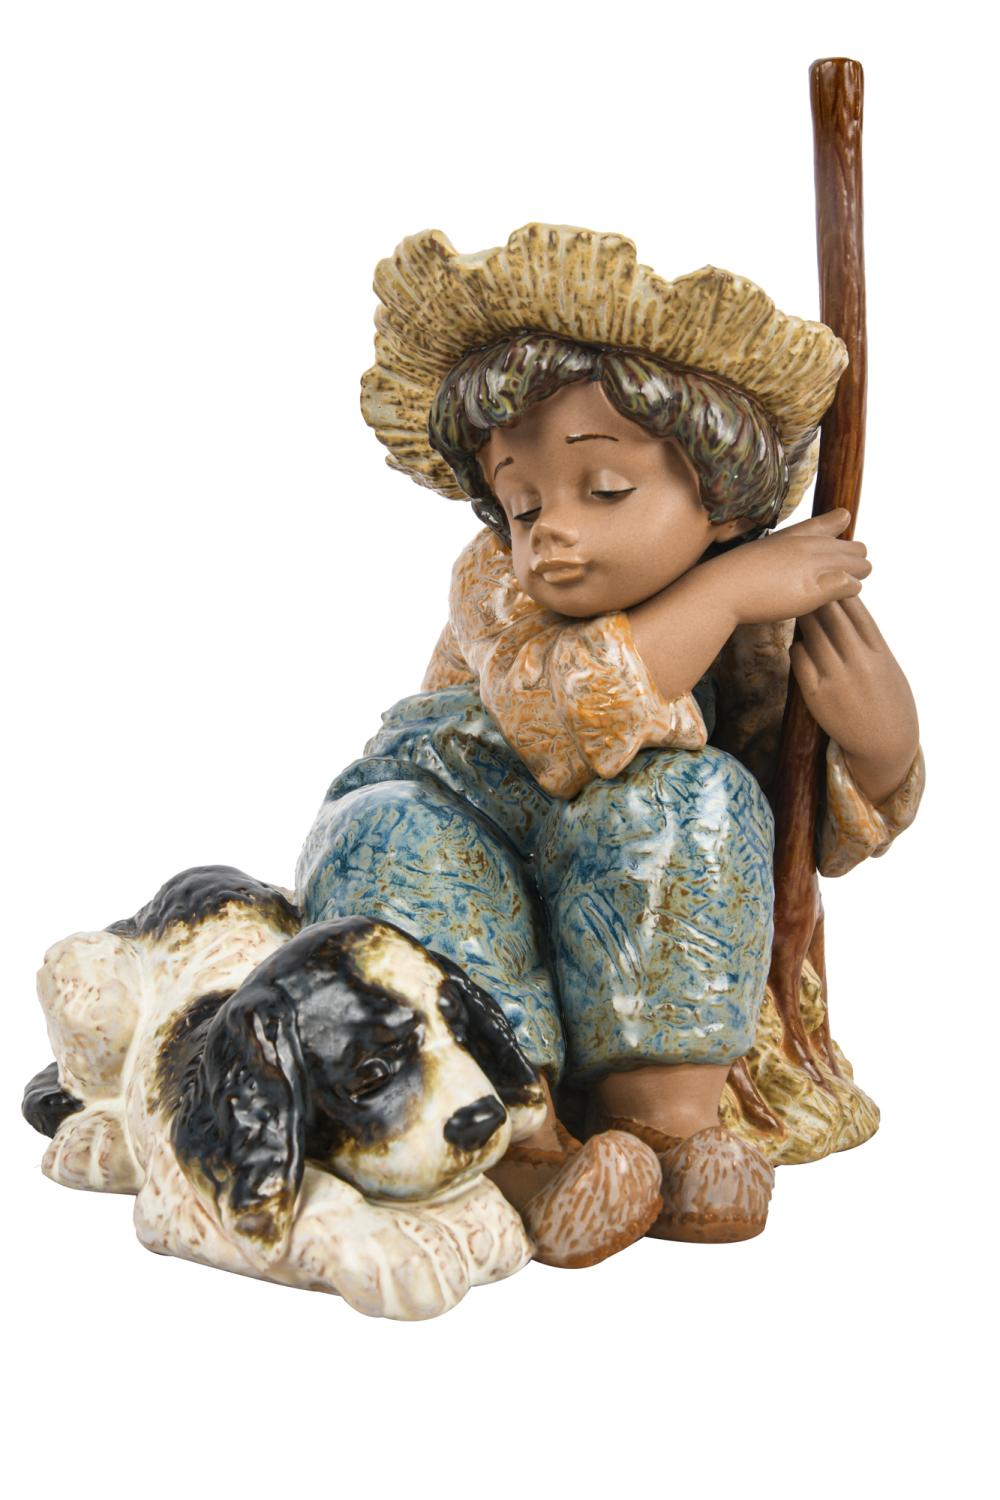 LARGE LLADRO FIGURE OF A CHILD